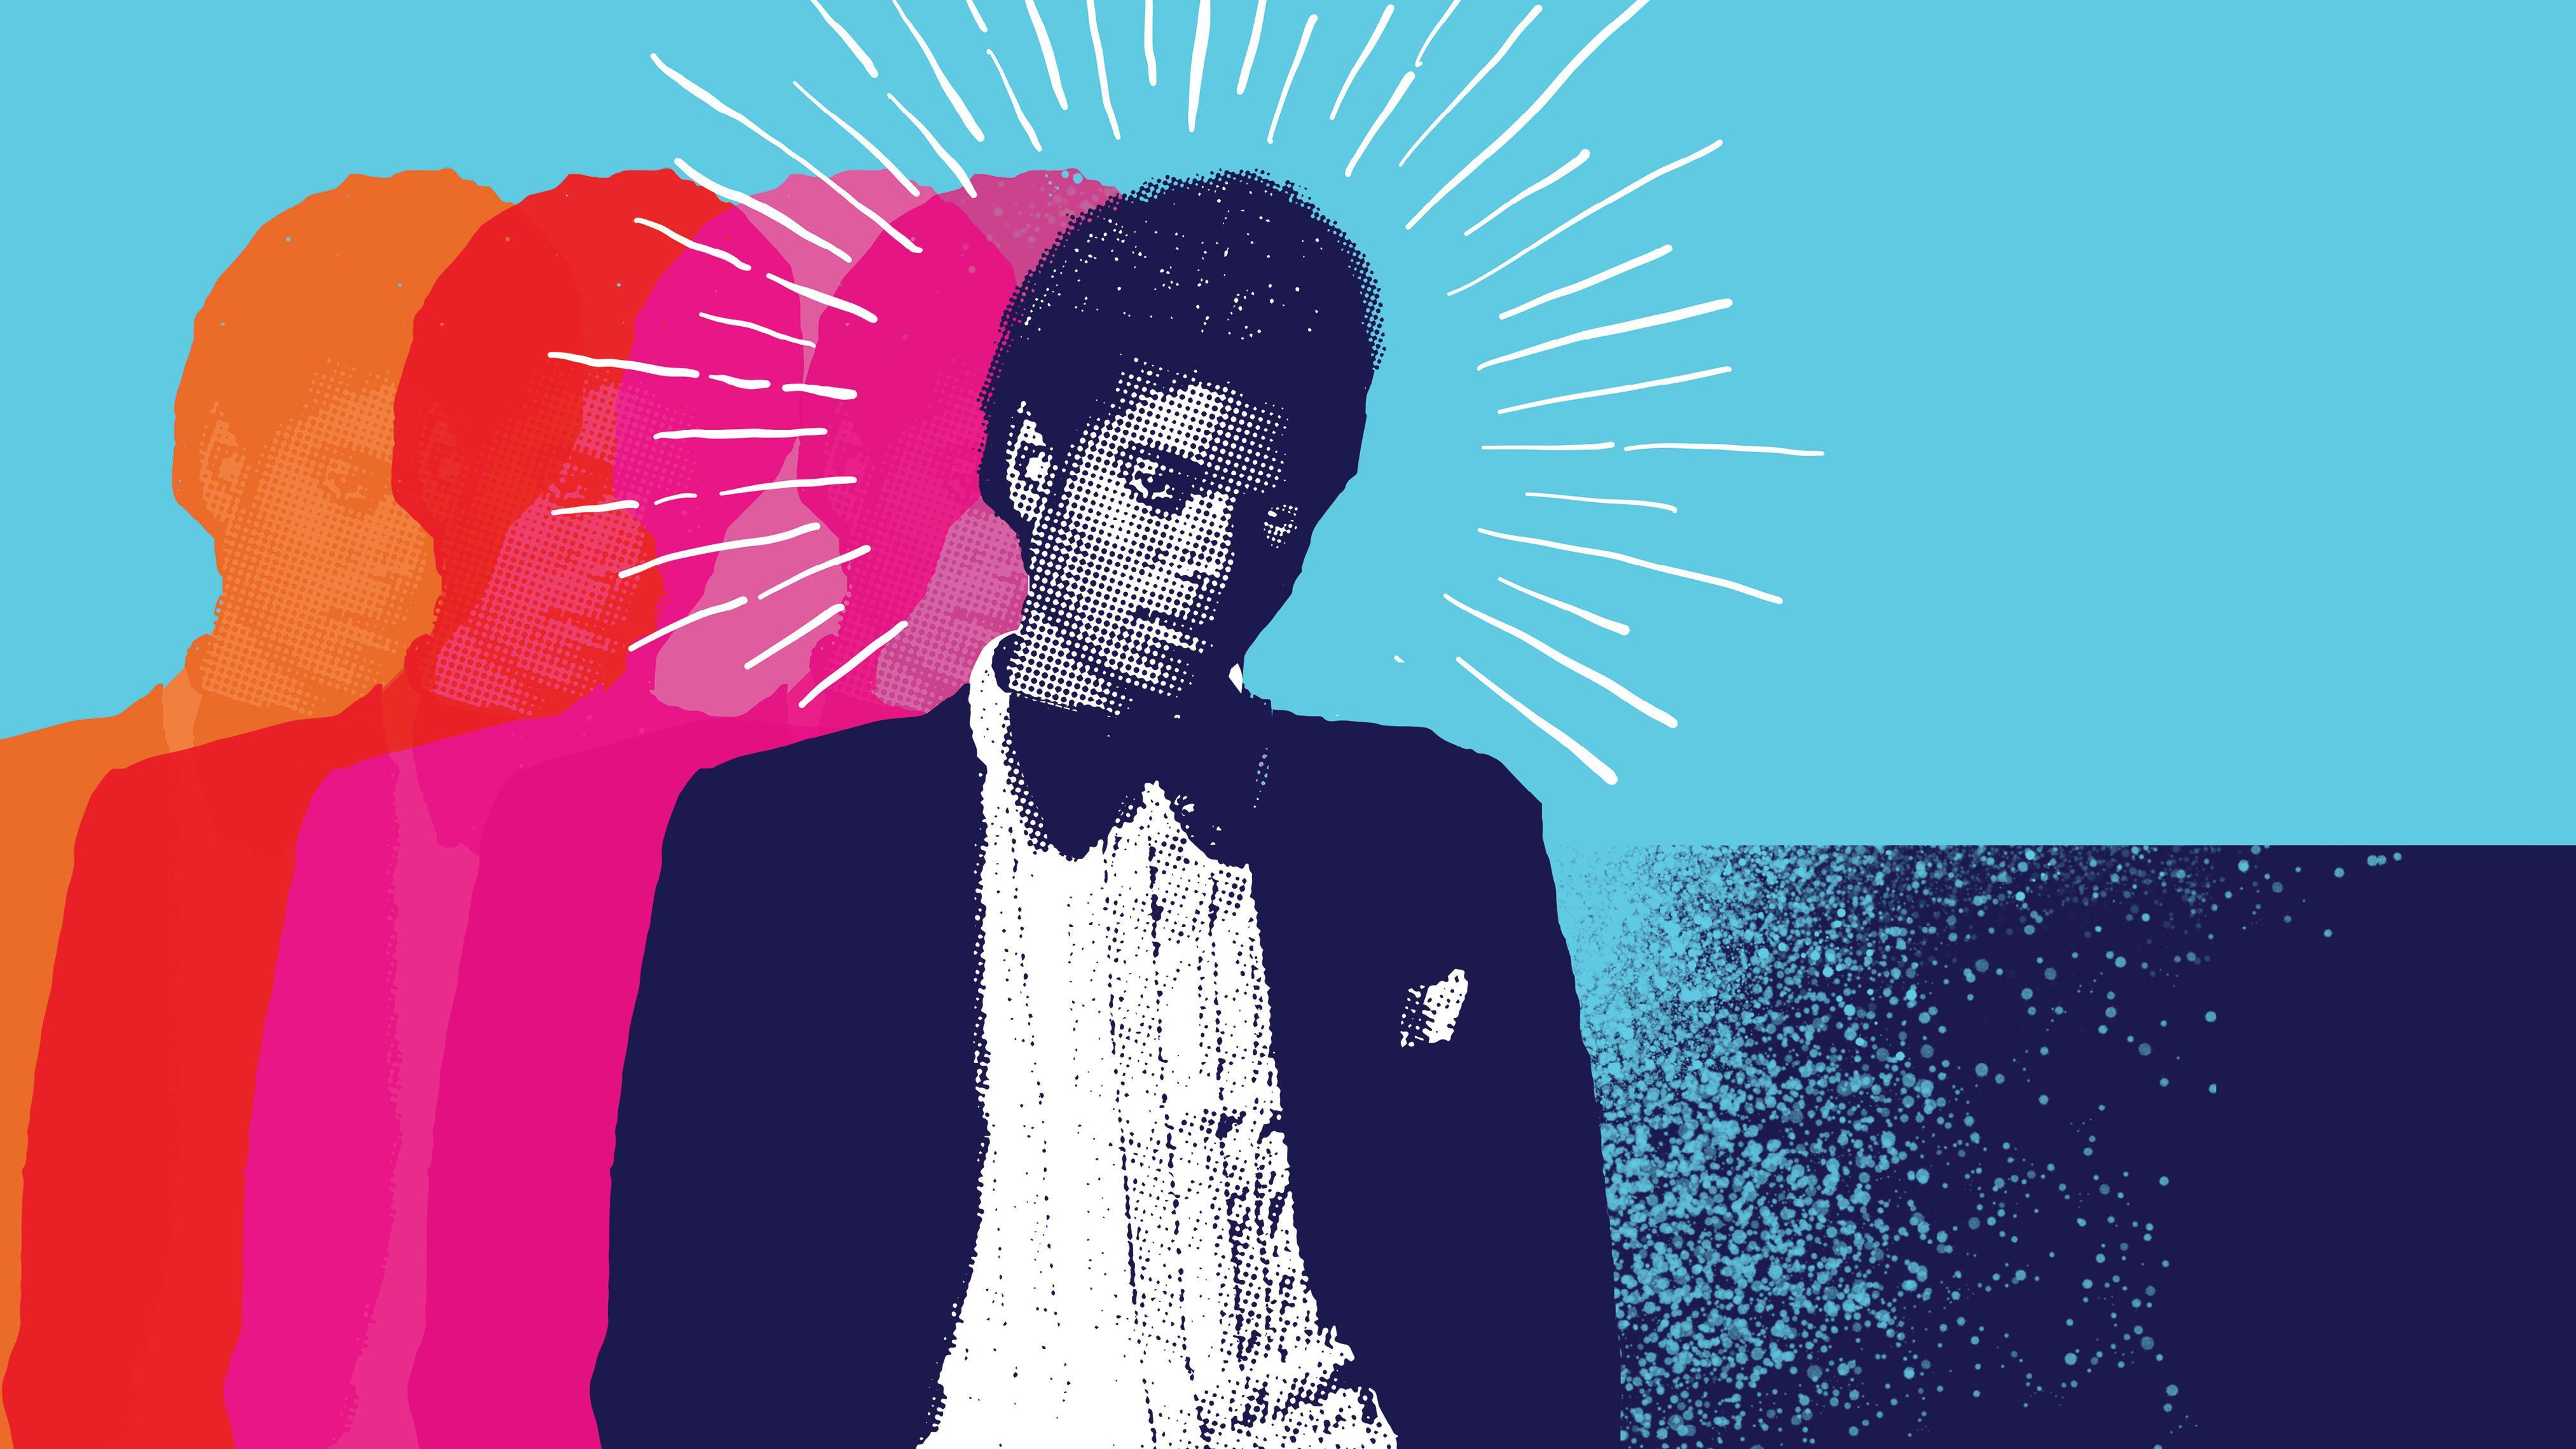 Spike Lee On Michael Jackson's Evolution From Child Star To 'Off